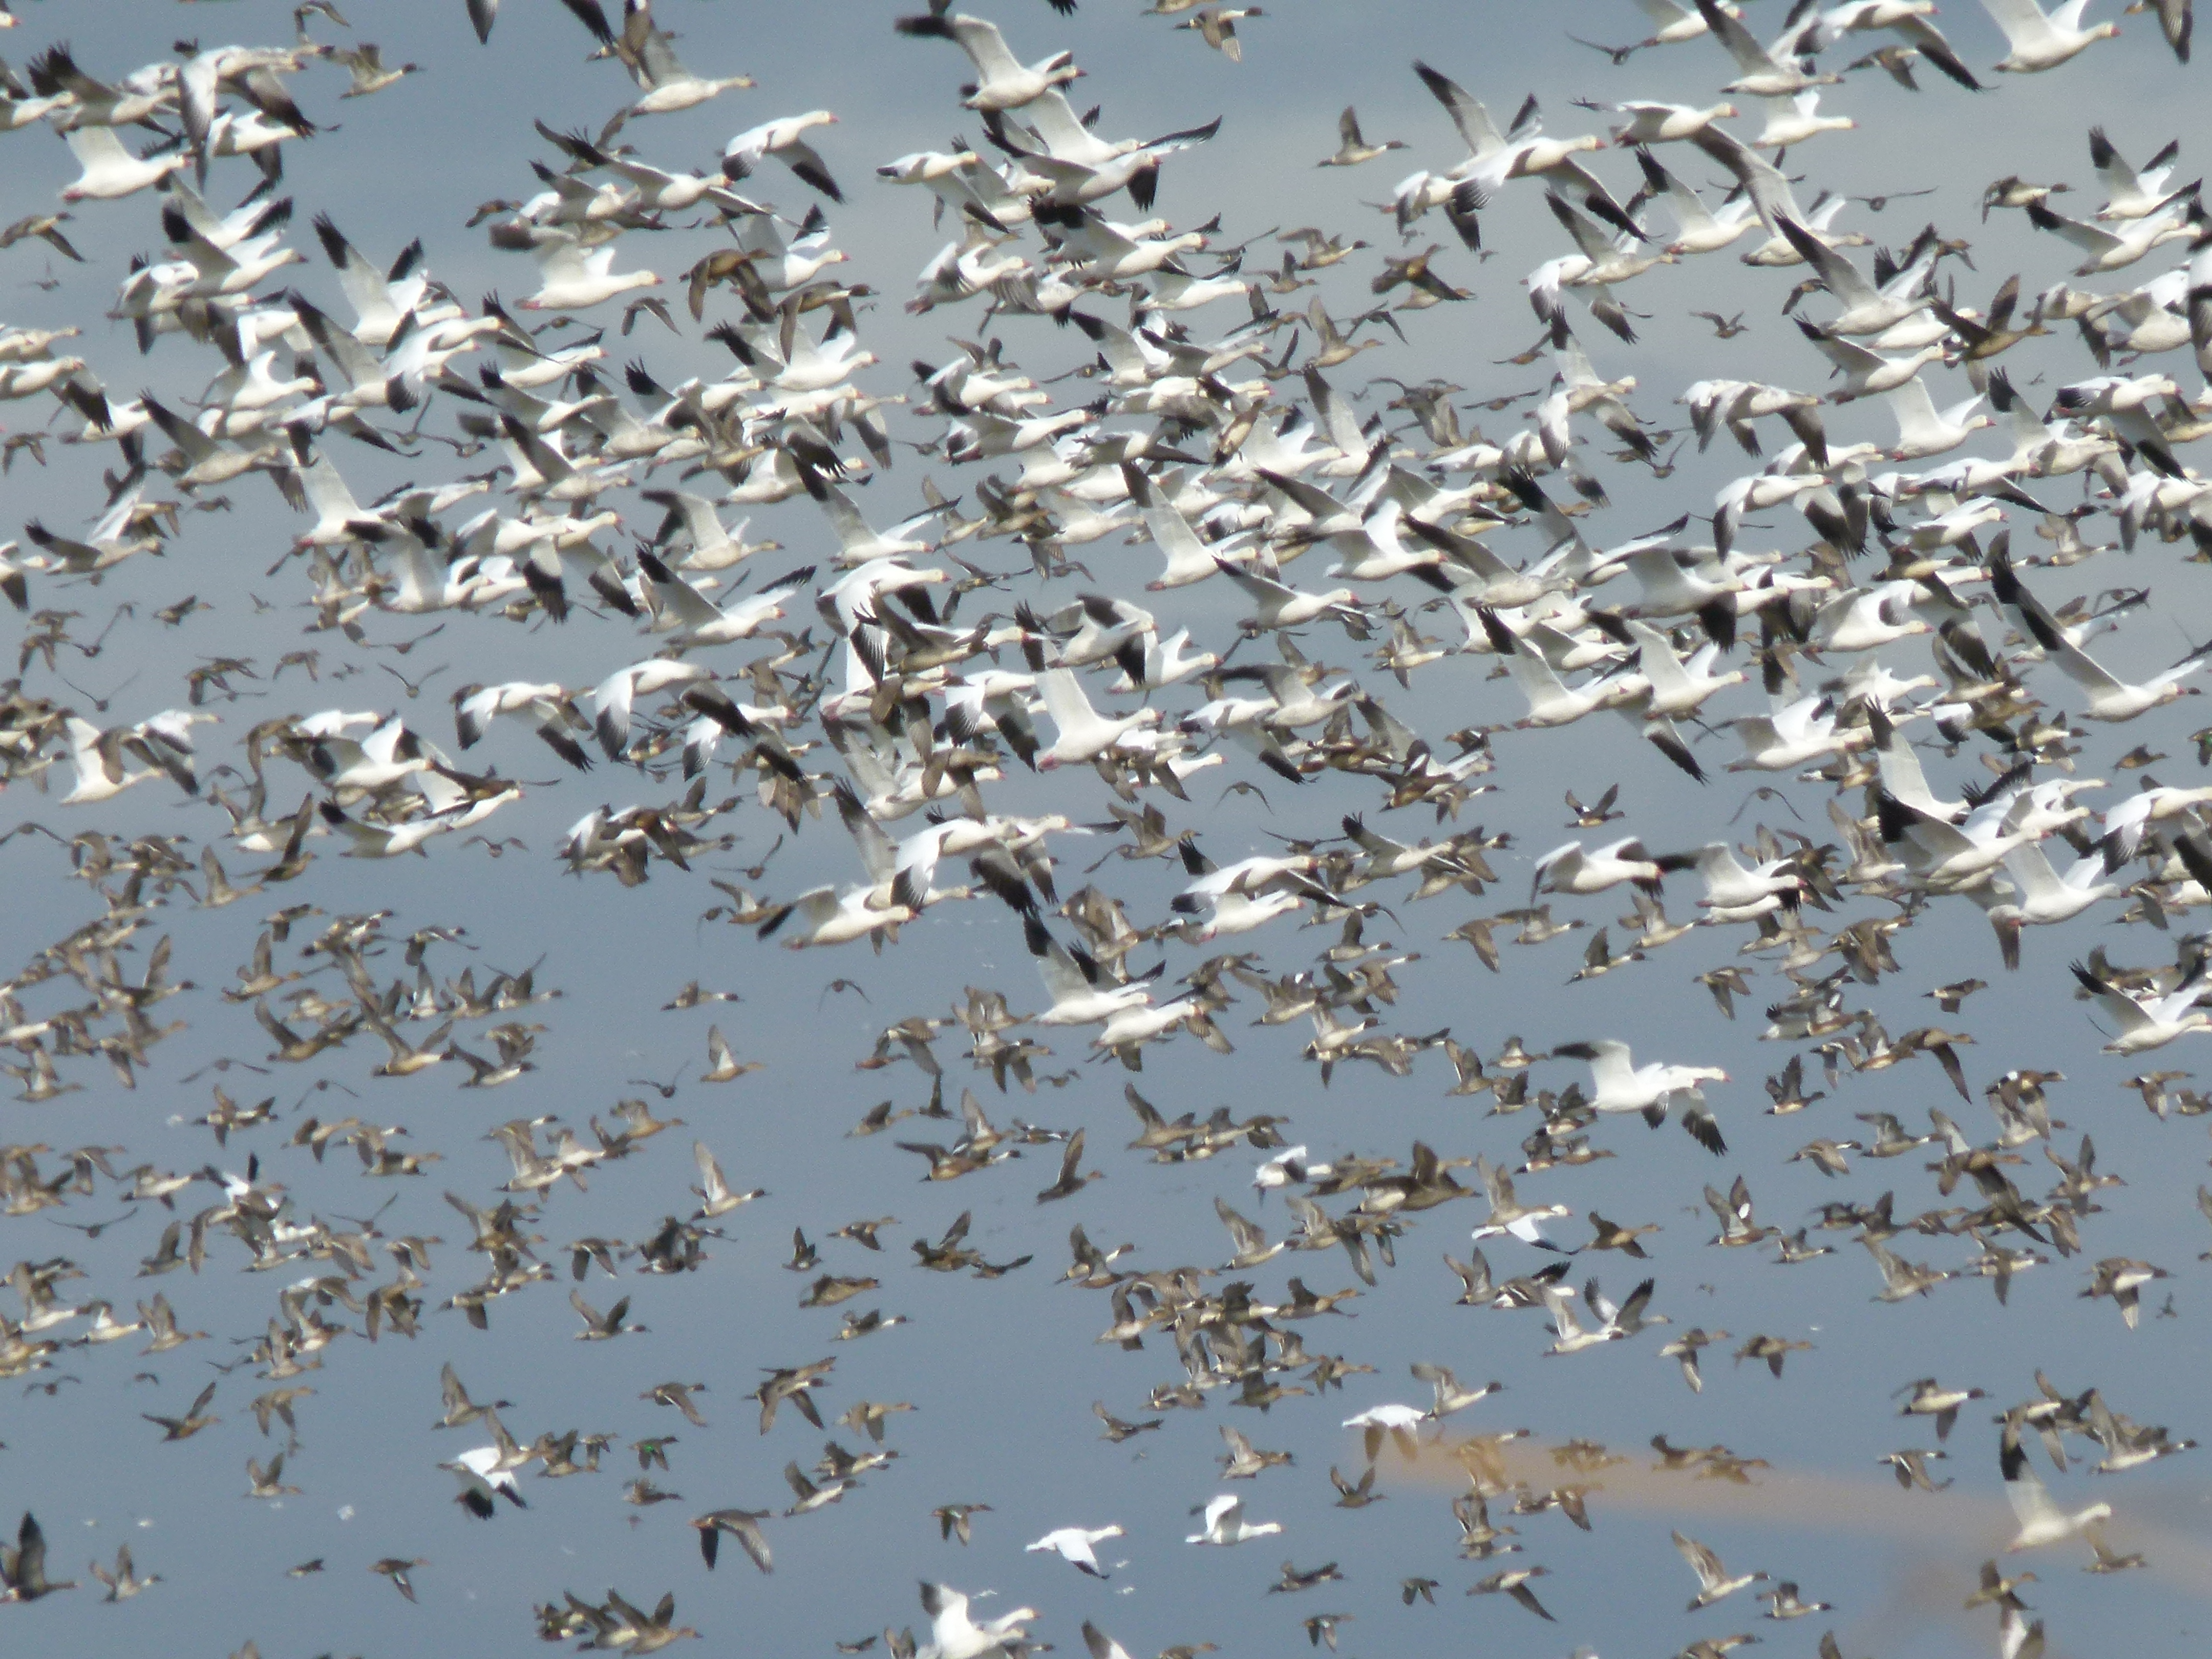 USDA's APHIS allows limited import of waterfowl from Canada